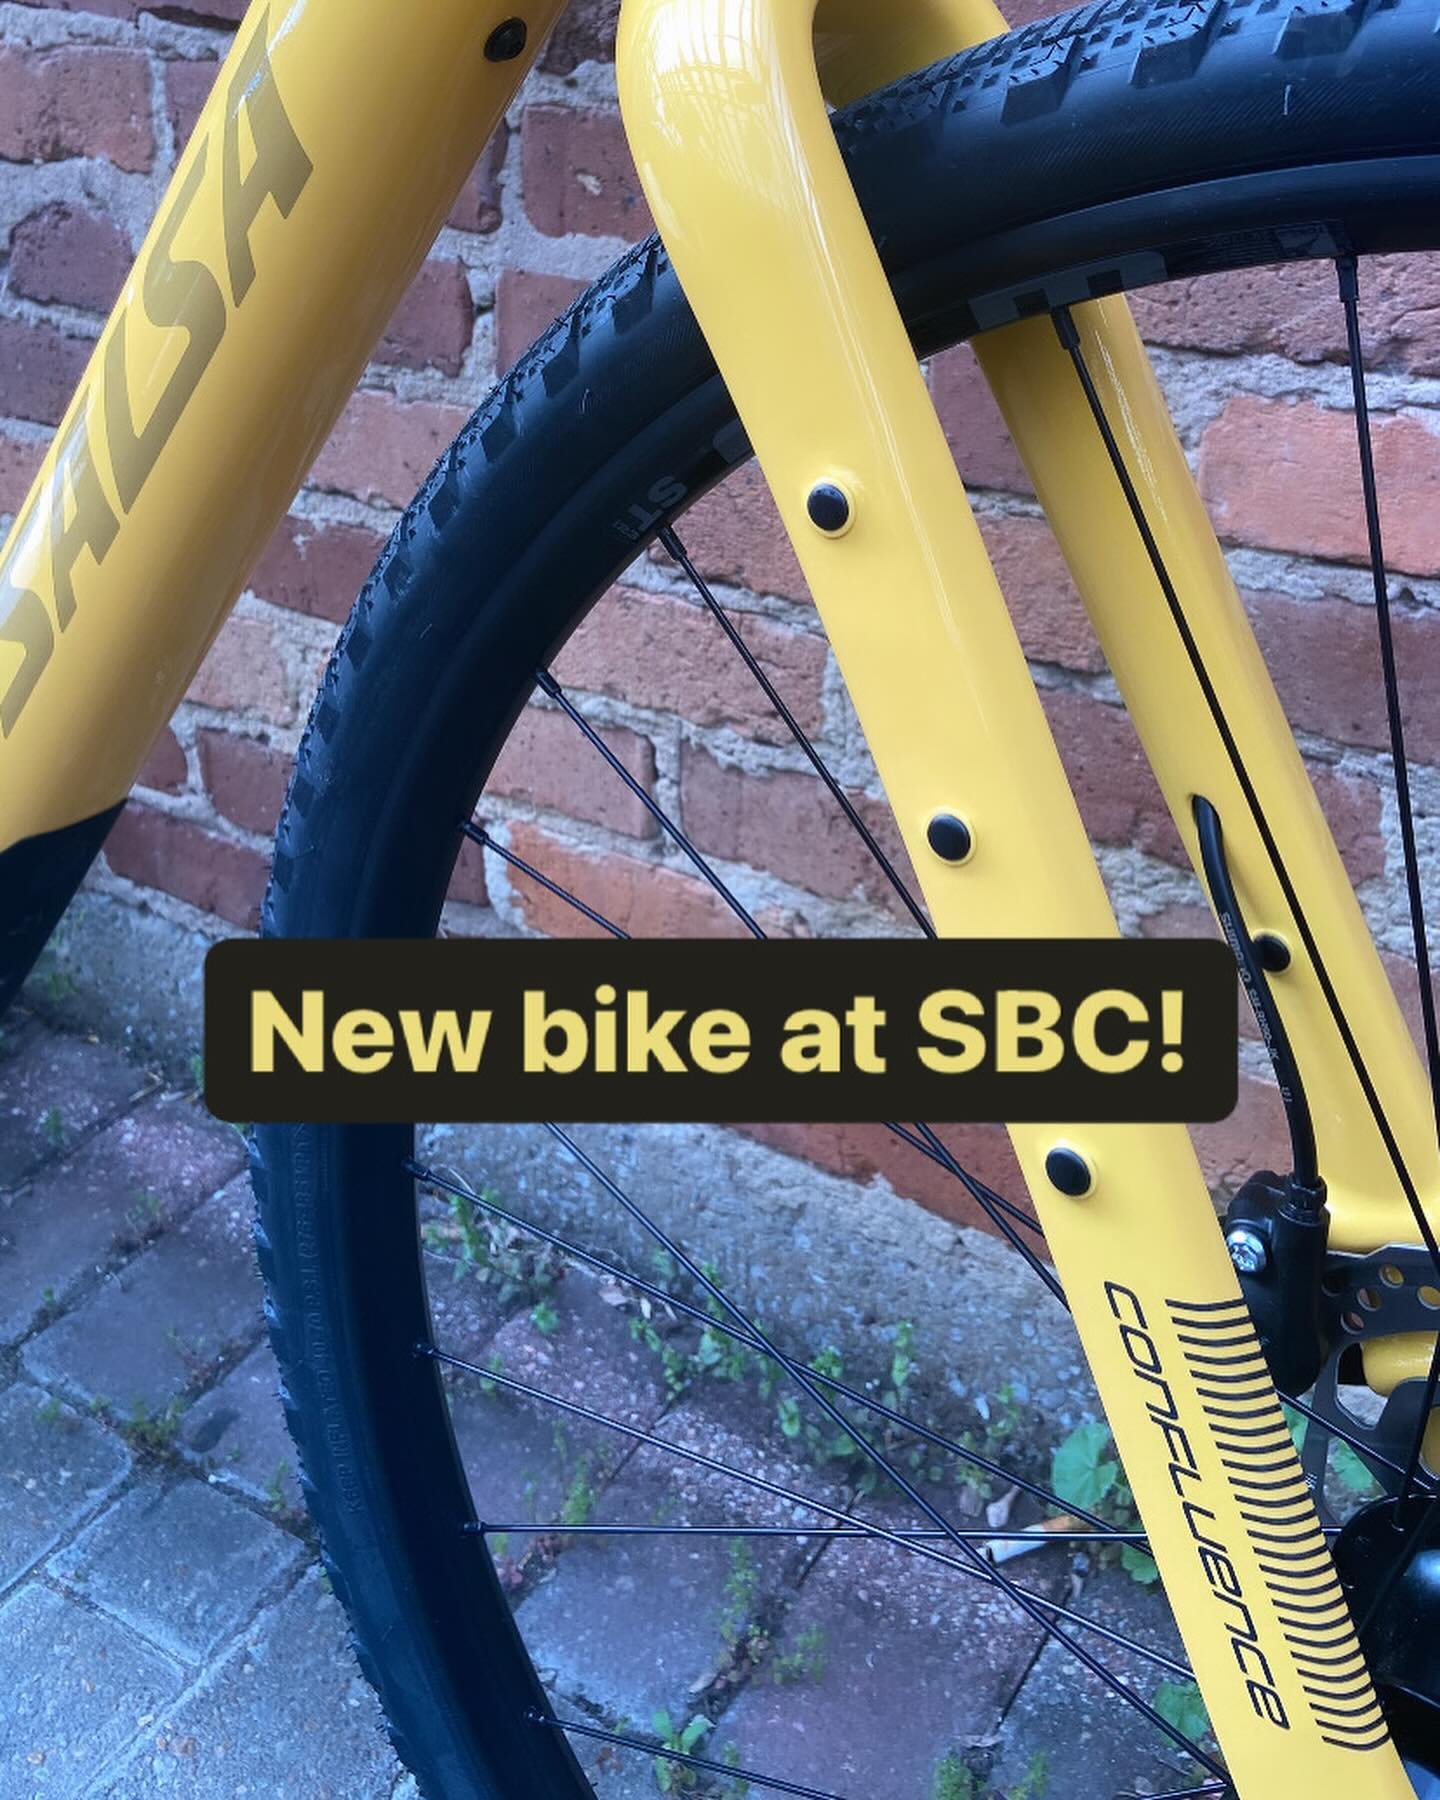 The new Salsa Confluence e-bike has landed. And what a hot Salsa color! Could have a sting to it! 🐝 
Come down to the shop and check it out!